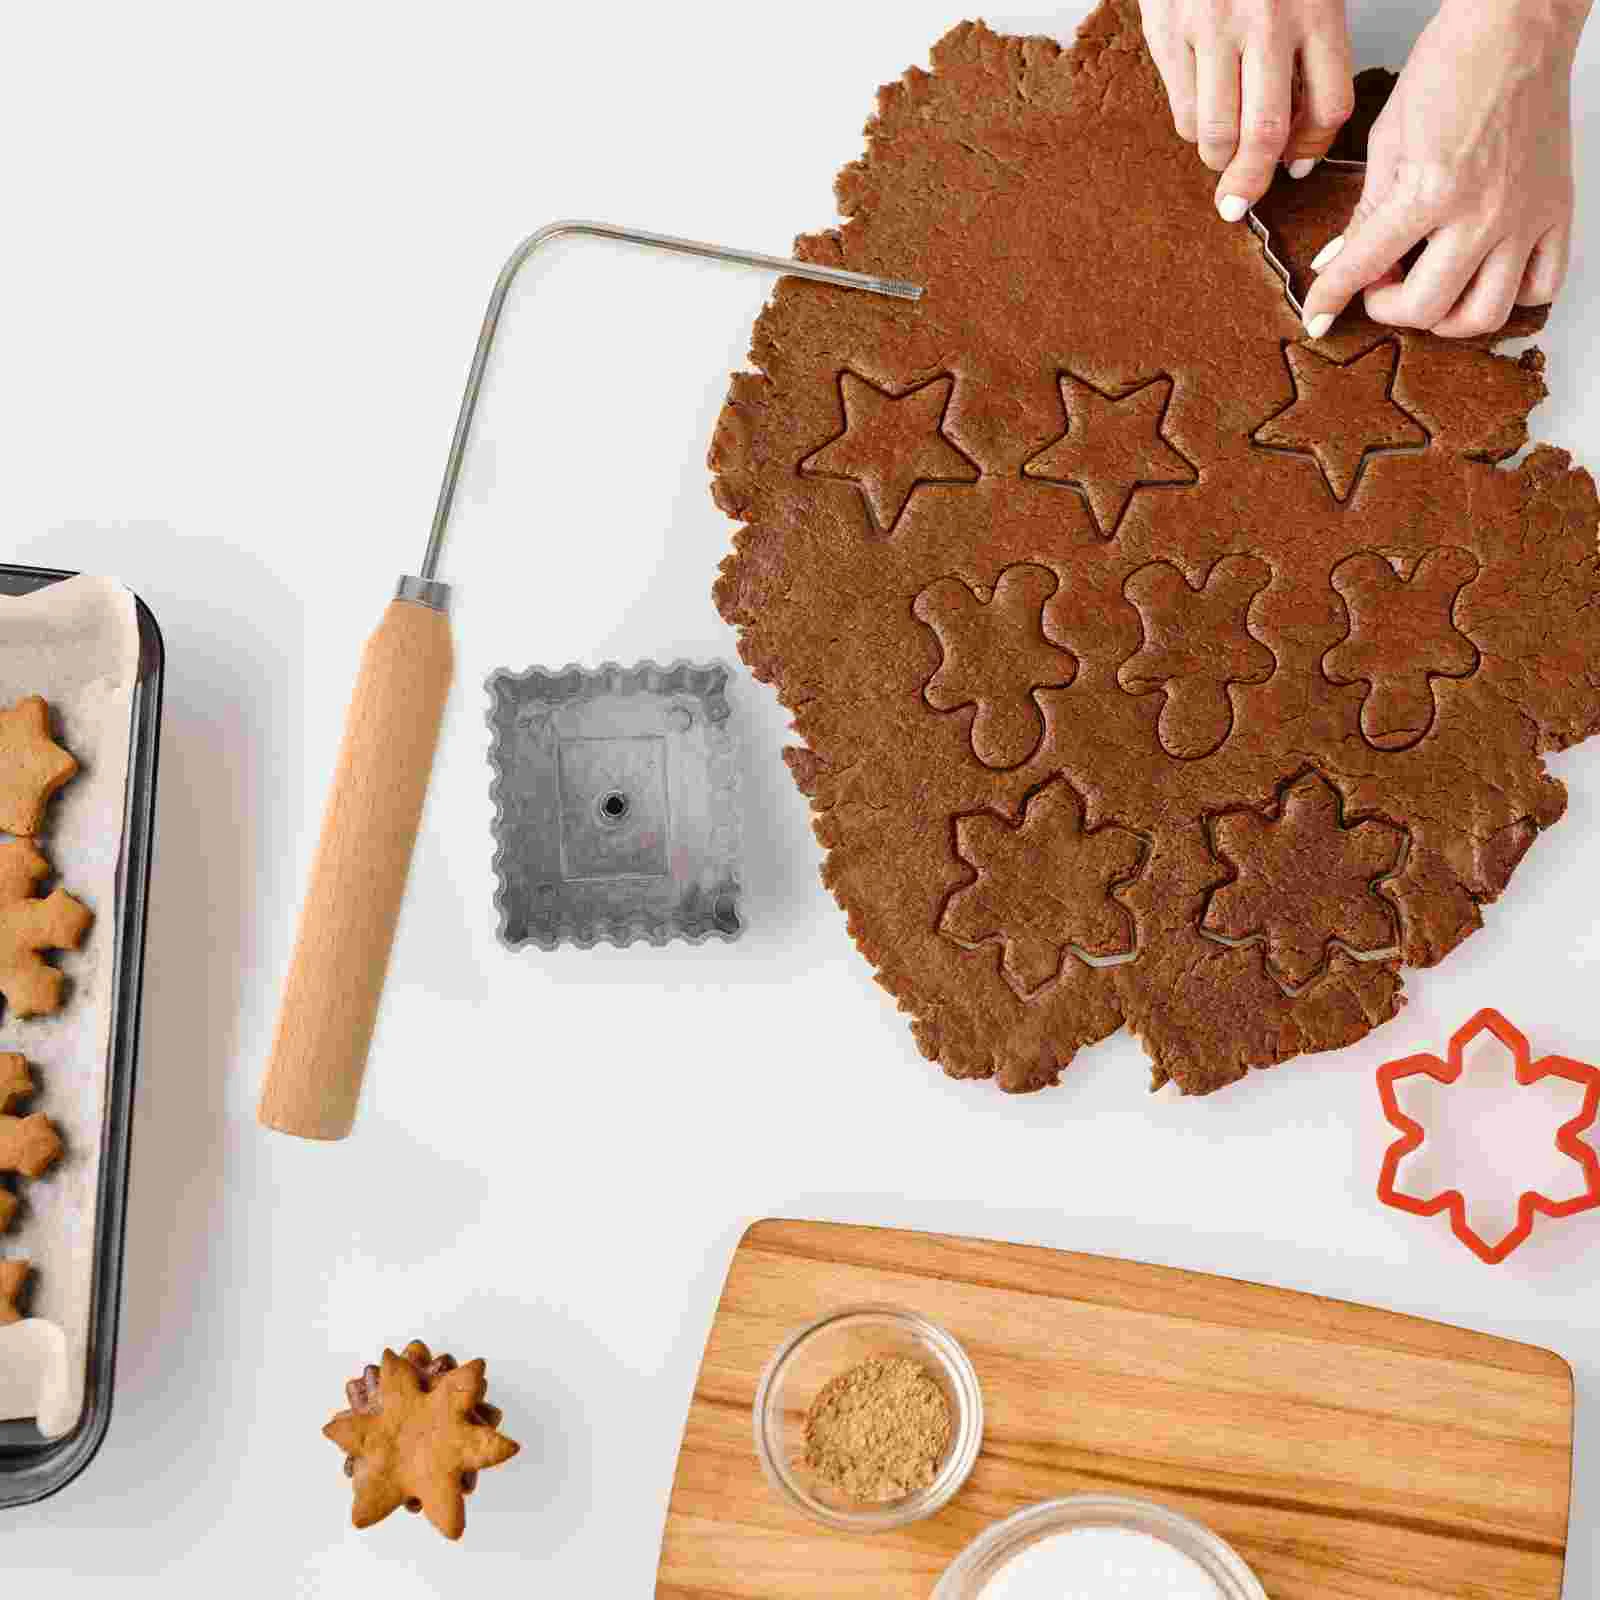 

Mold Rosette Iron Molds Cookie Swedish Waffle Handle Frying Timbale Pastry Maker De Set Buñuelos Viento Rossette Kitchen Fried